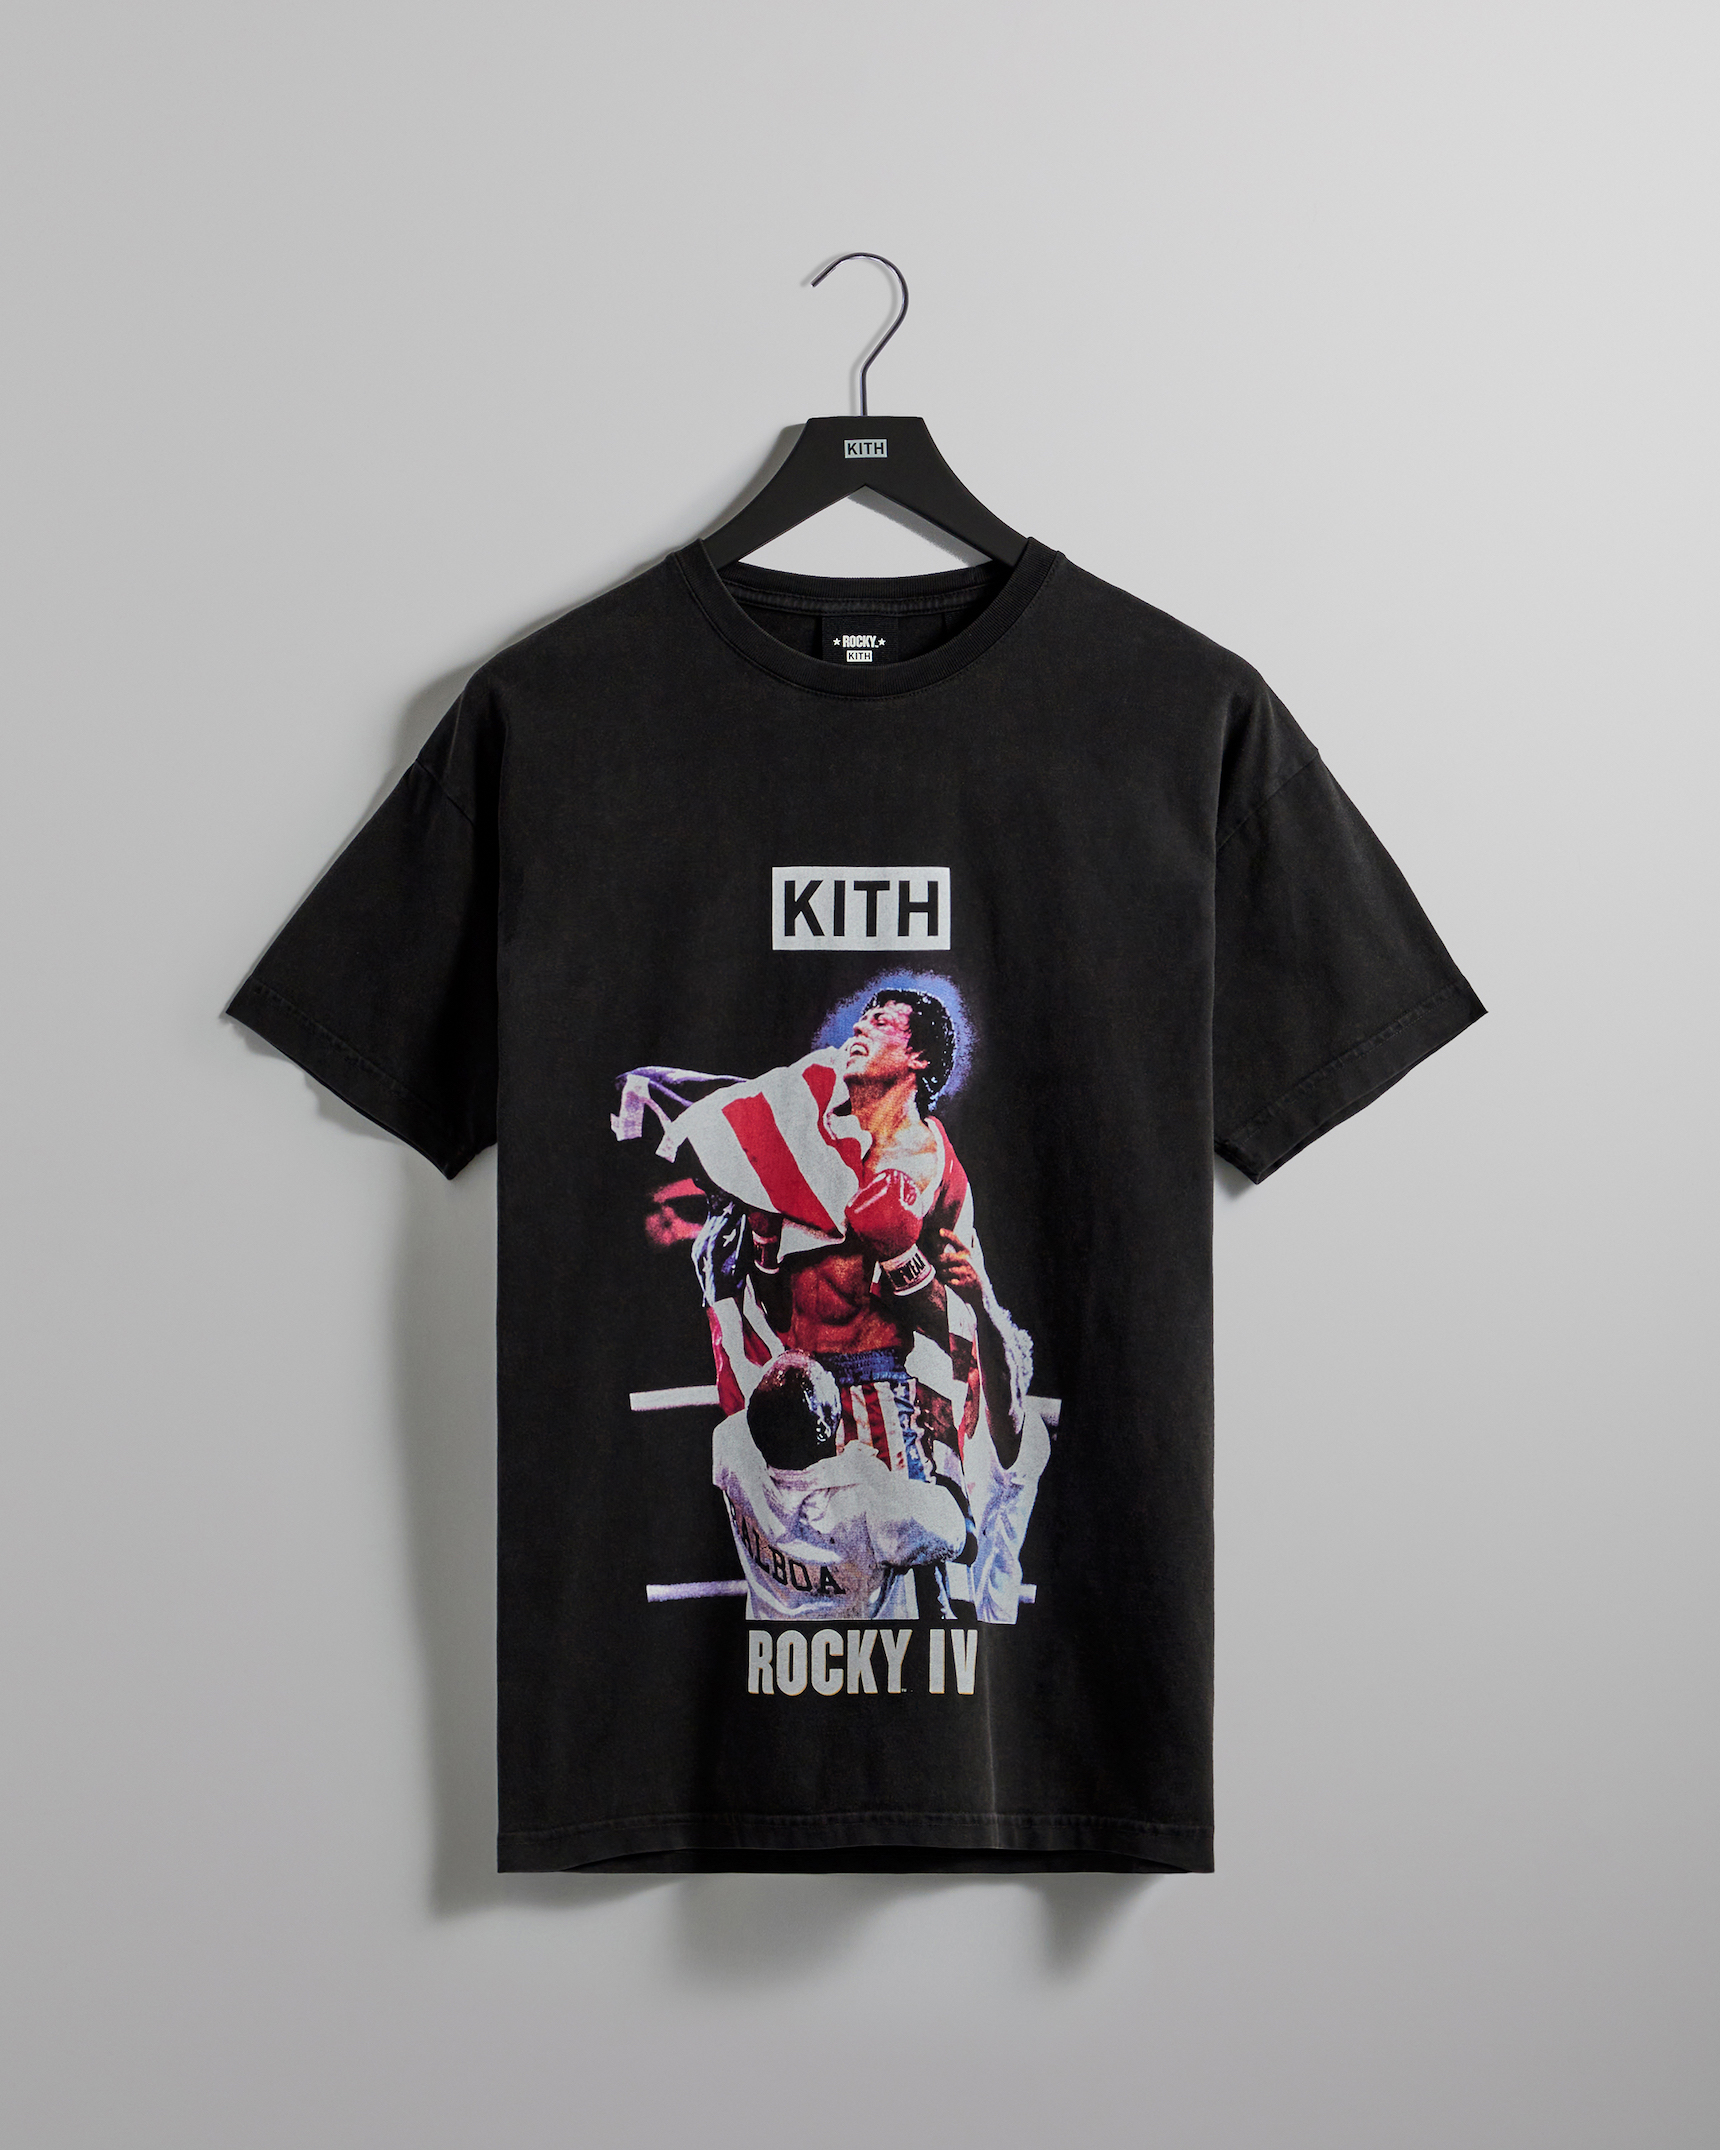 Kith Pays Tribute to Rocky Balboa in New Collection - V Magazine